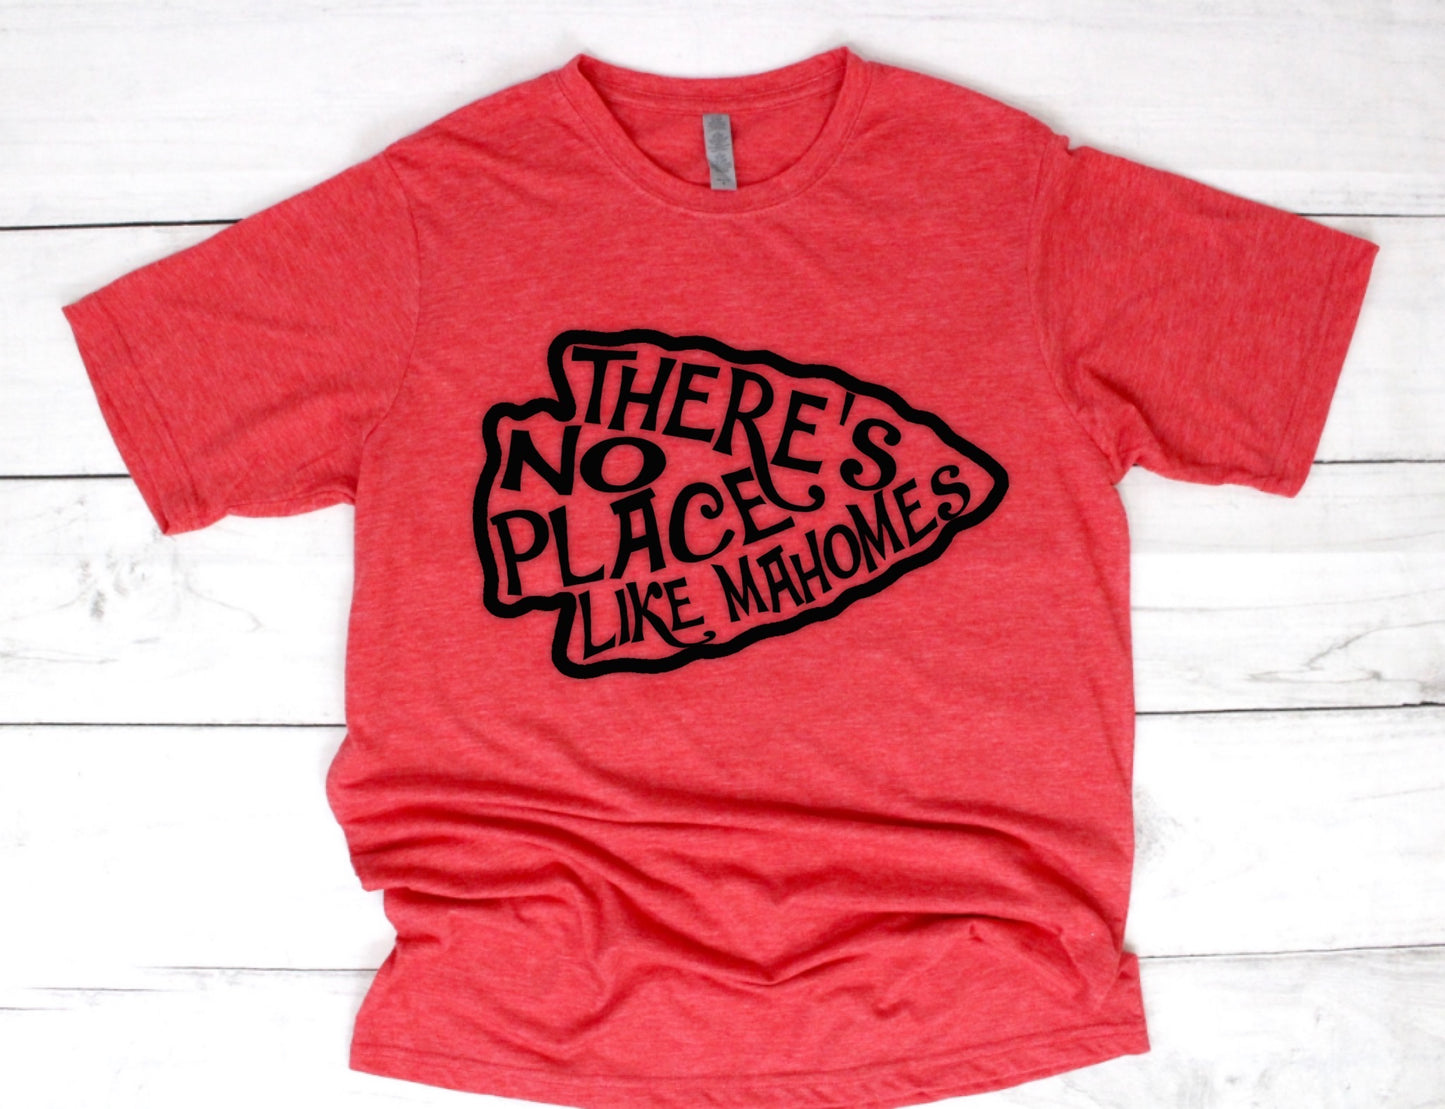 There’s No Place Like Mahomes Tee